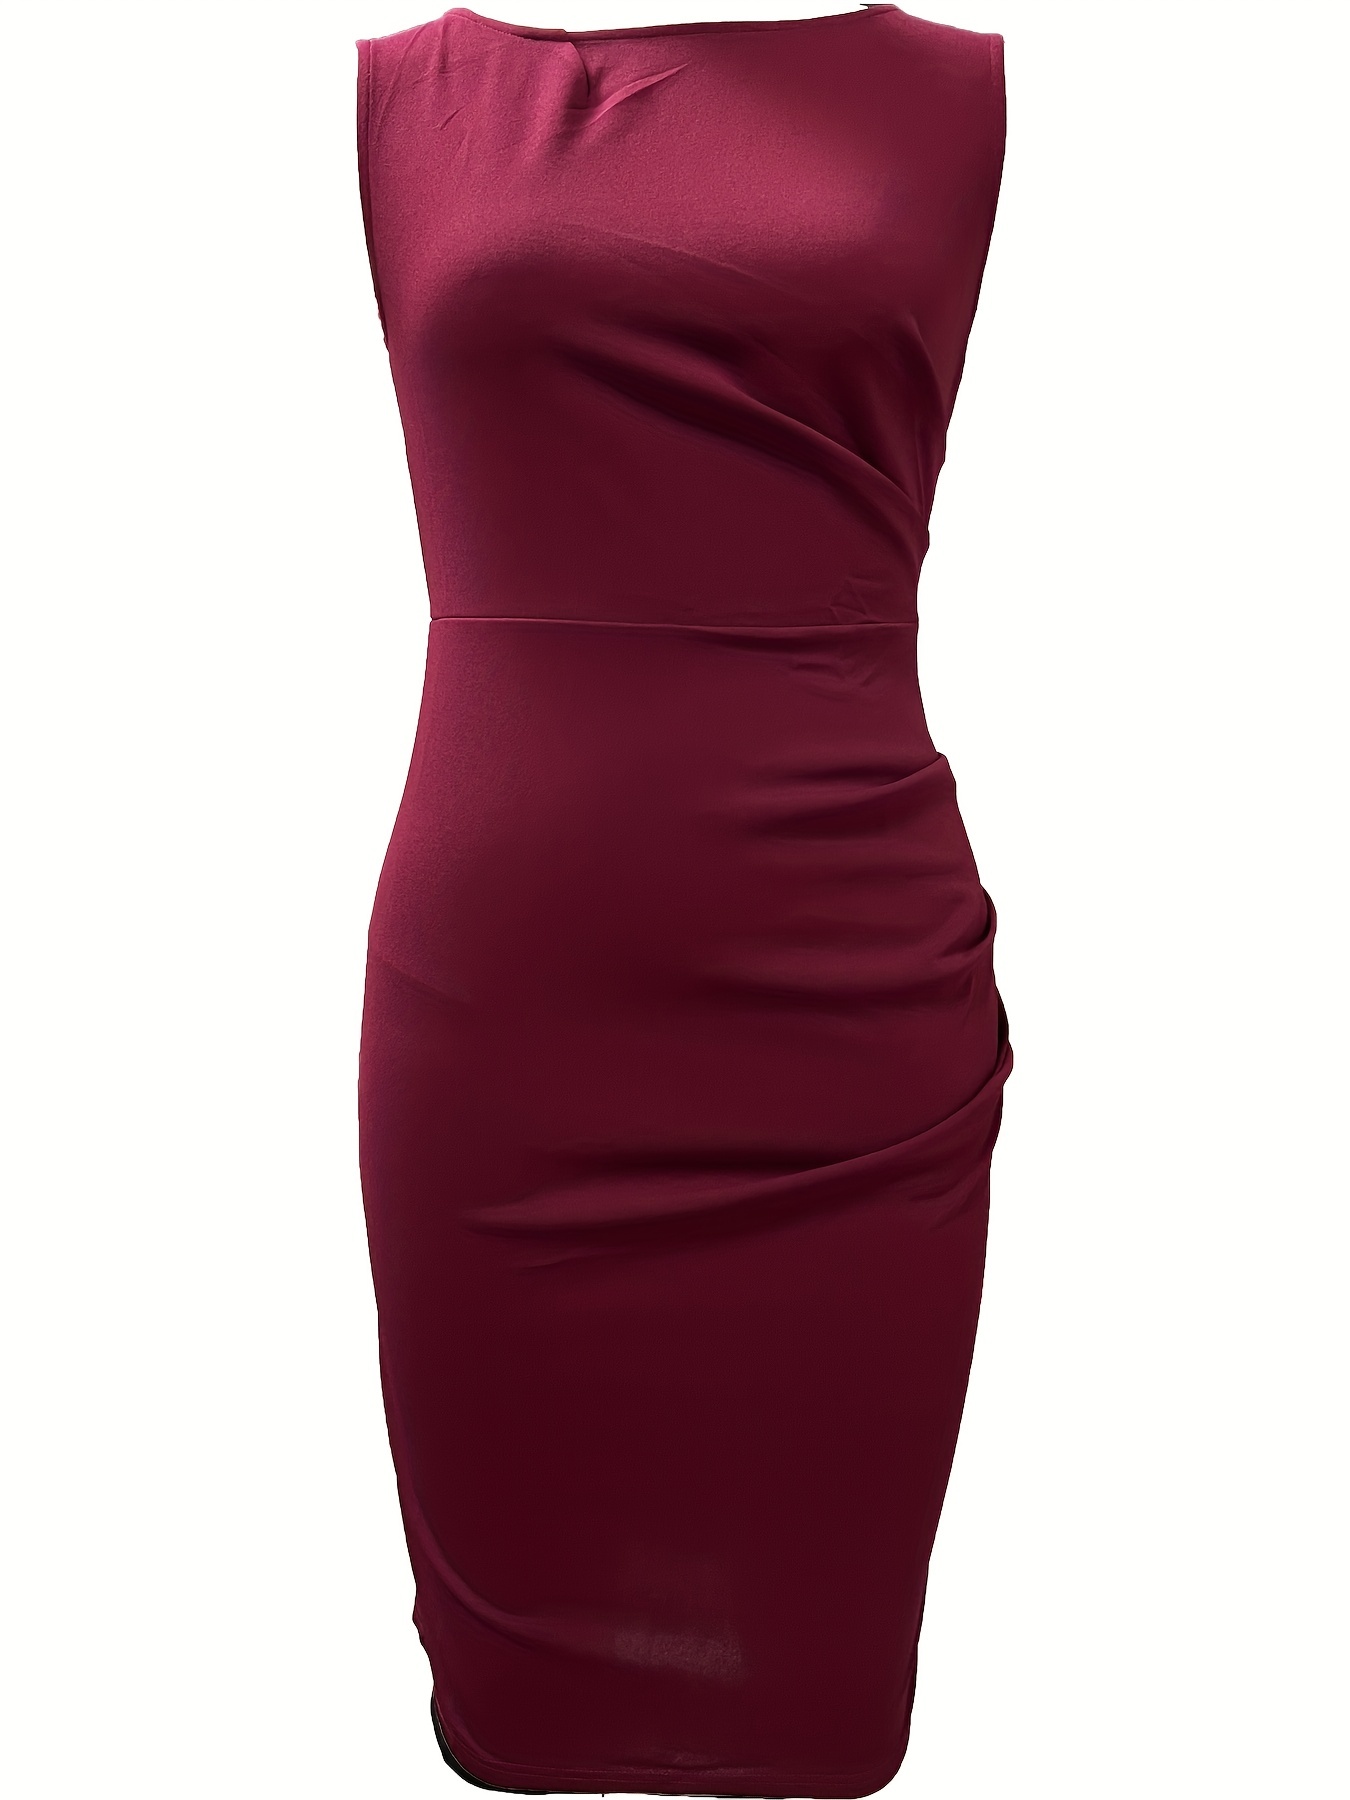 ruched pencil dress elegant crew neck sleeveless work office dress womens clothing details 22